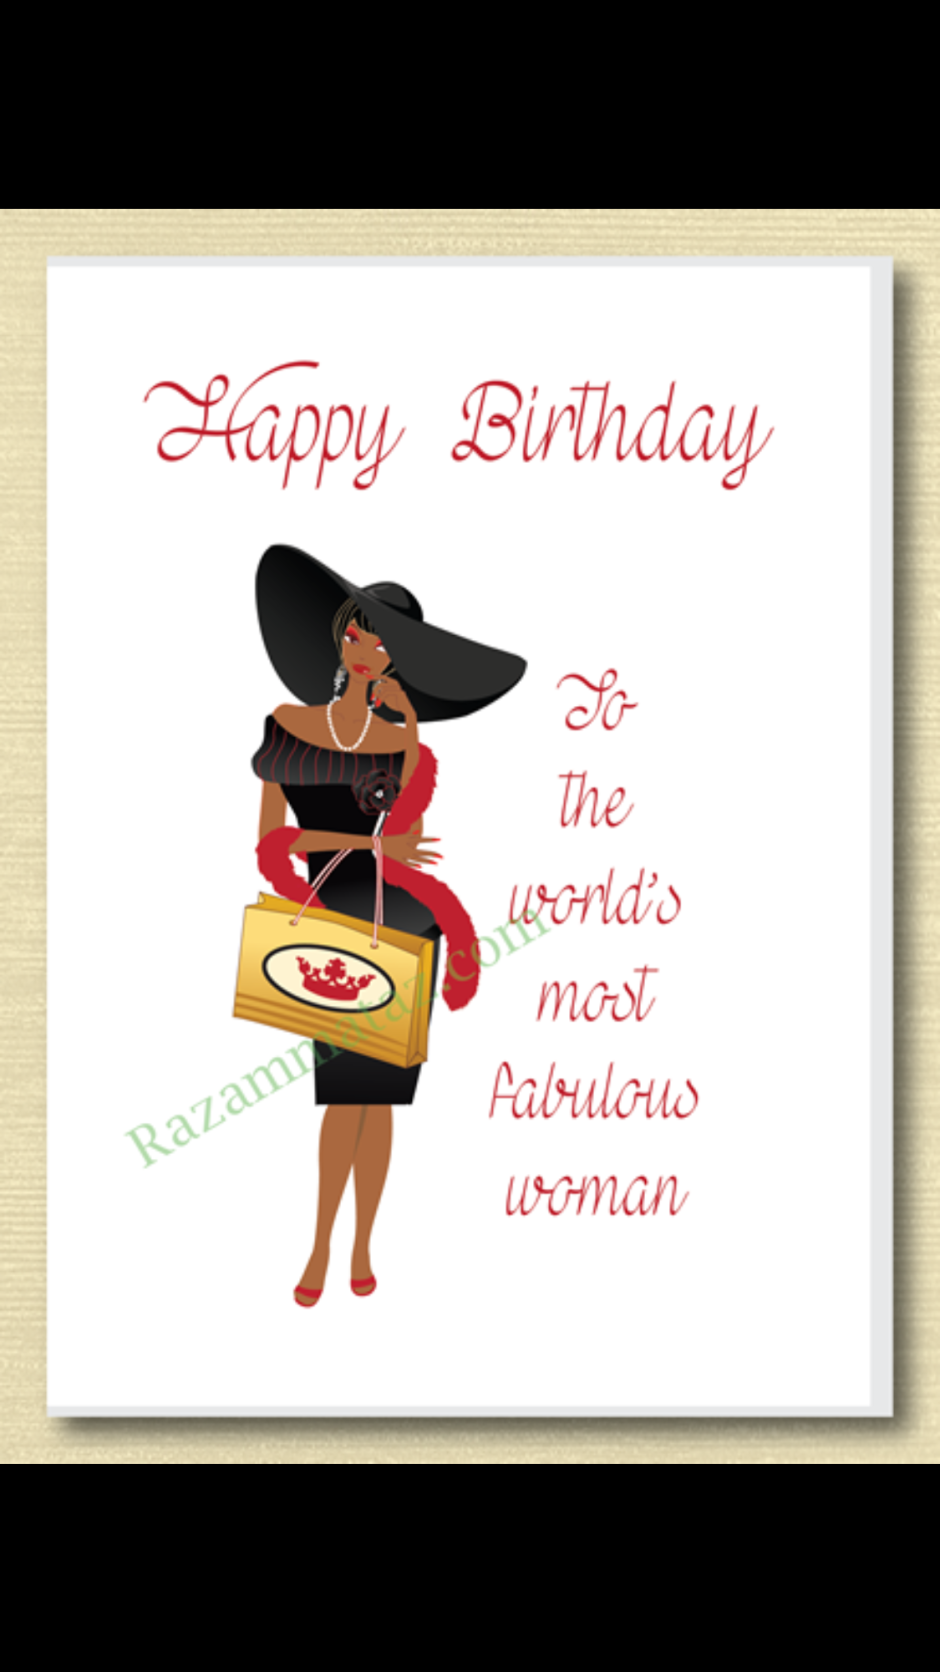 Happy Birthday Cards for women